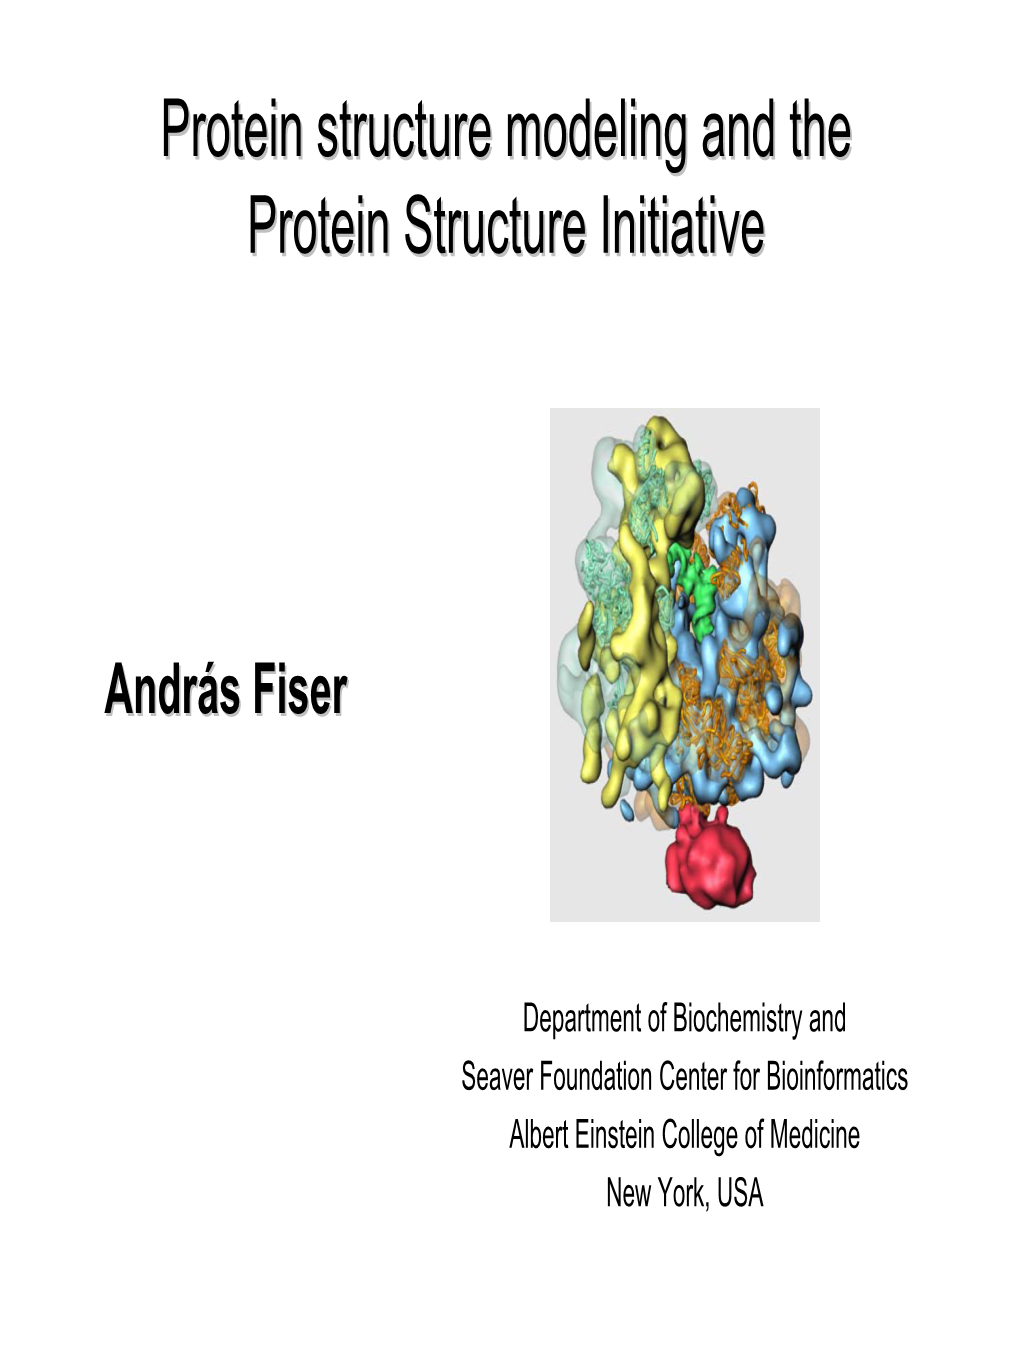 Protein Structure Modeling and the Protein Structure Initiative